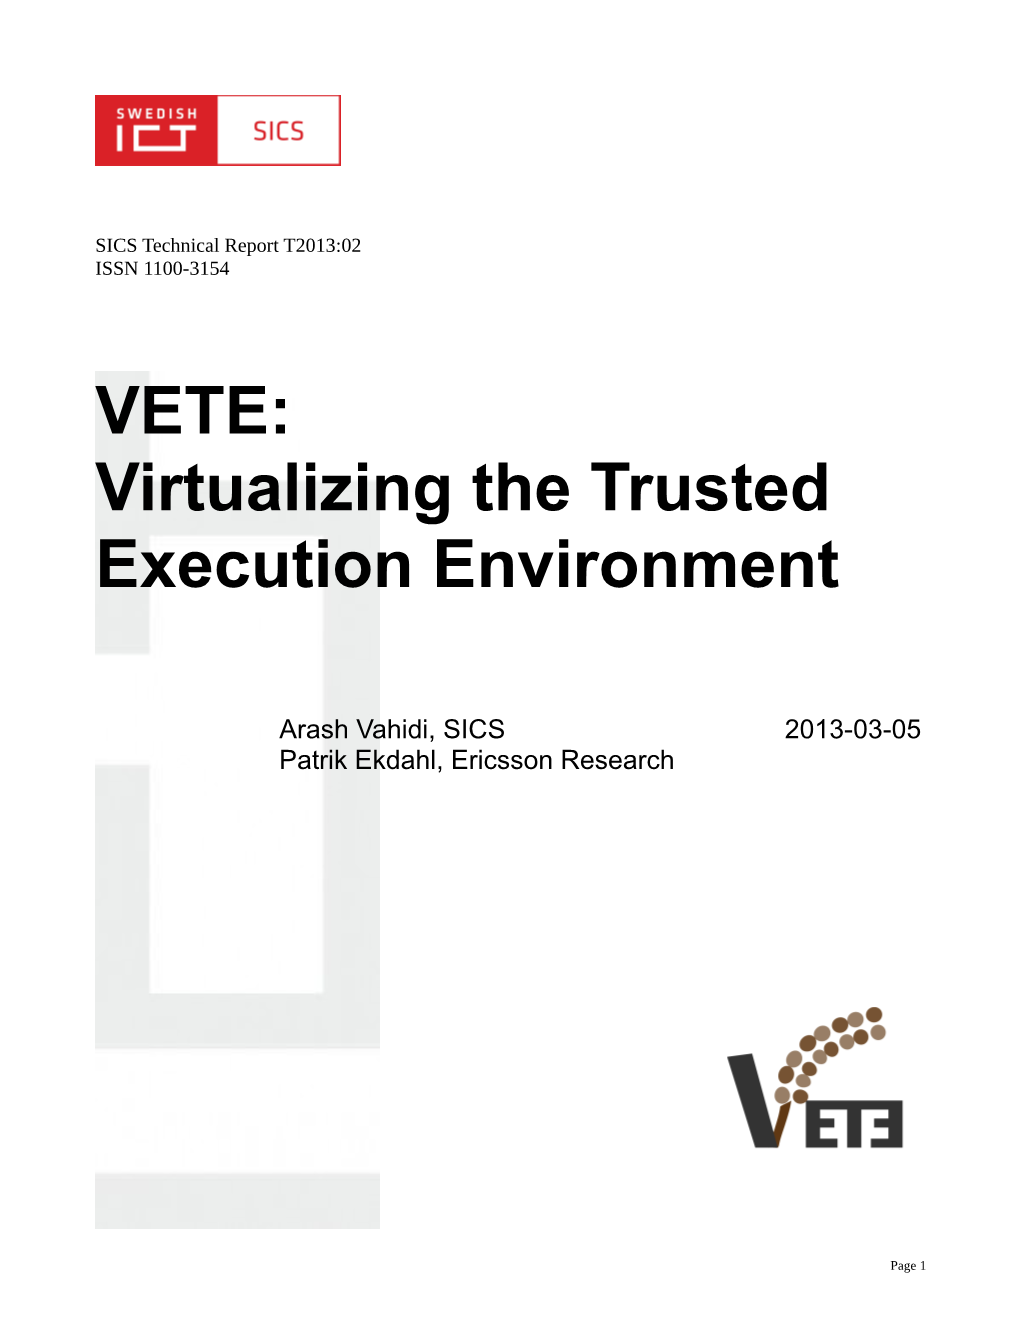 VETE: Virtualizing the Trusted Execution Environment